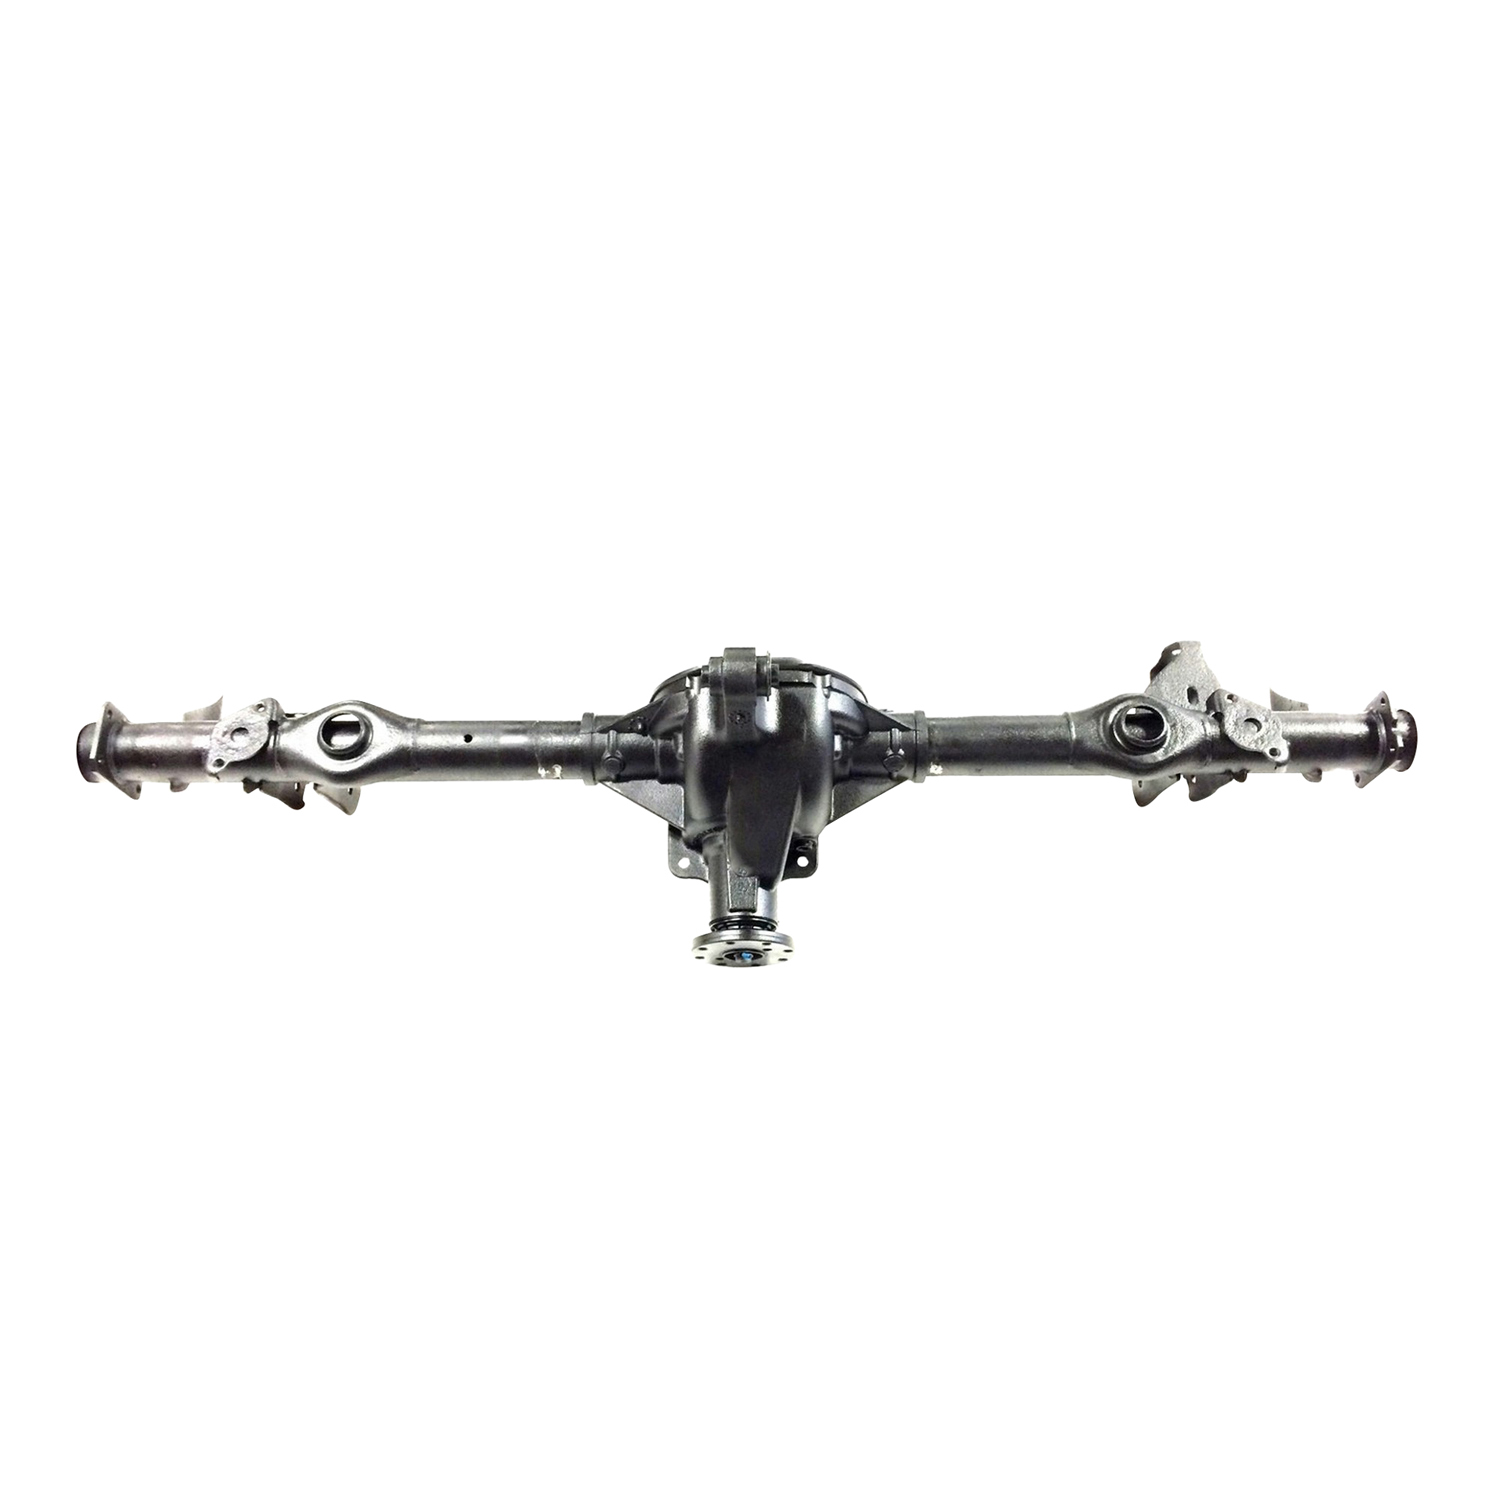 Remanufactured Complete Axle Assembly for 7.5" 05-10 Mustang 3.31 w/o ABS, Posi LSD